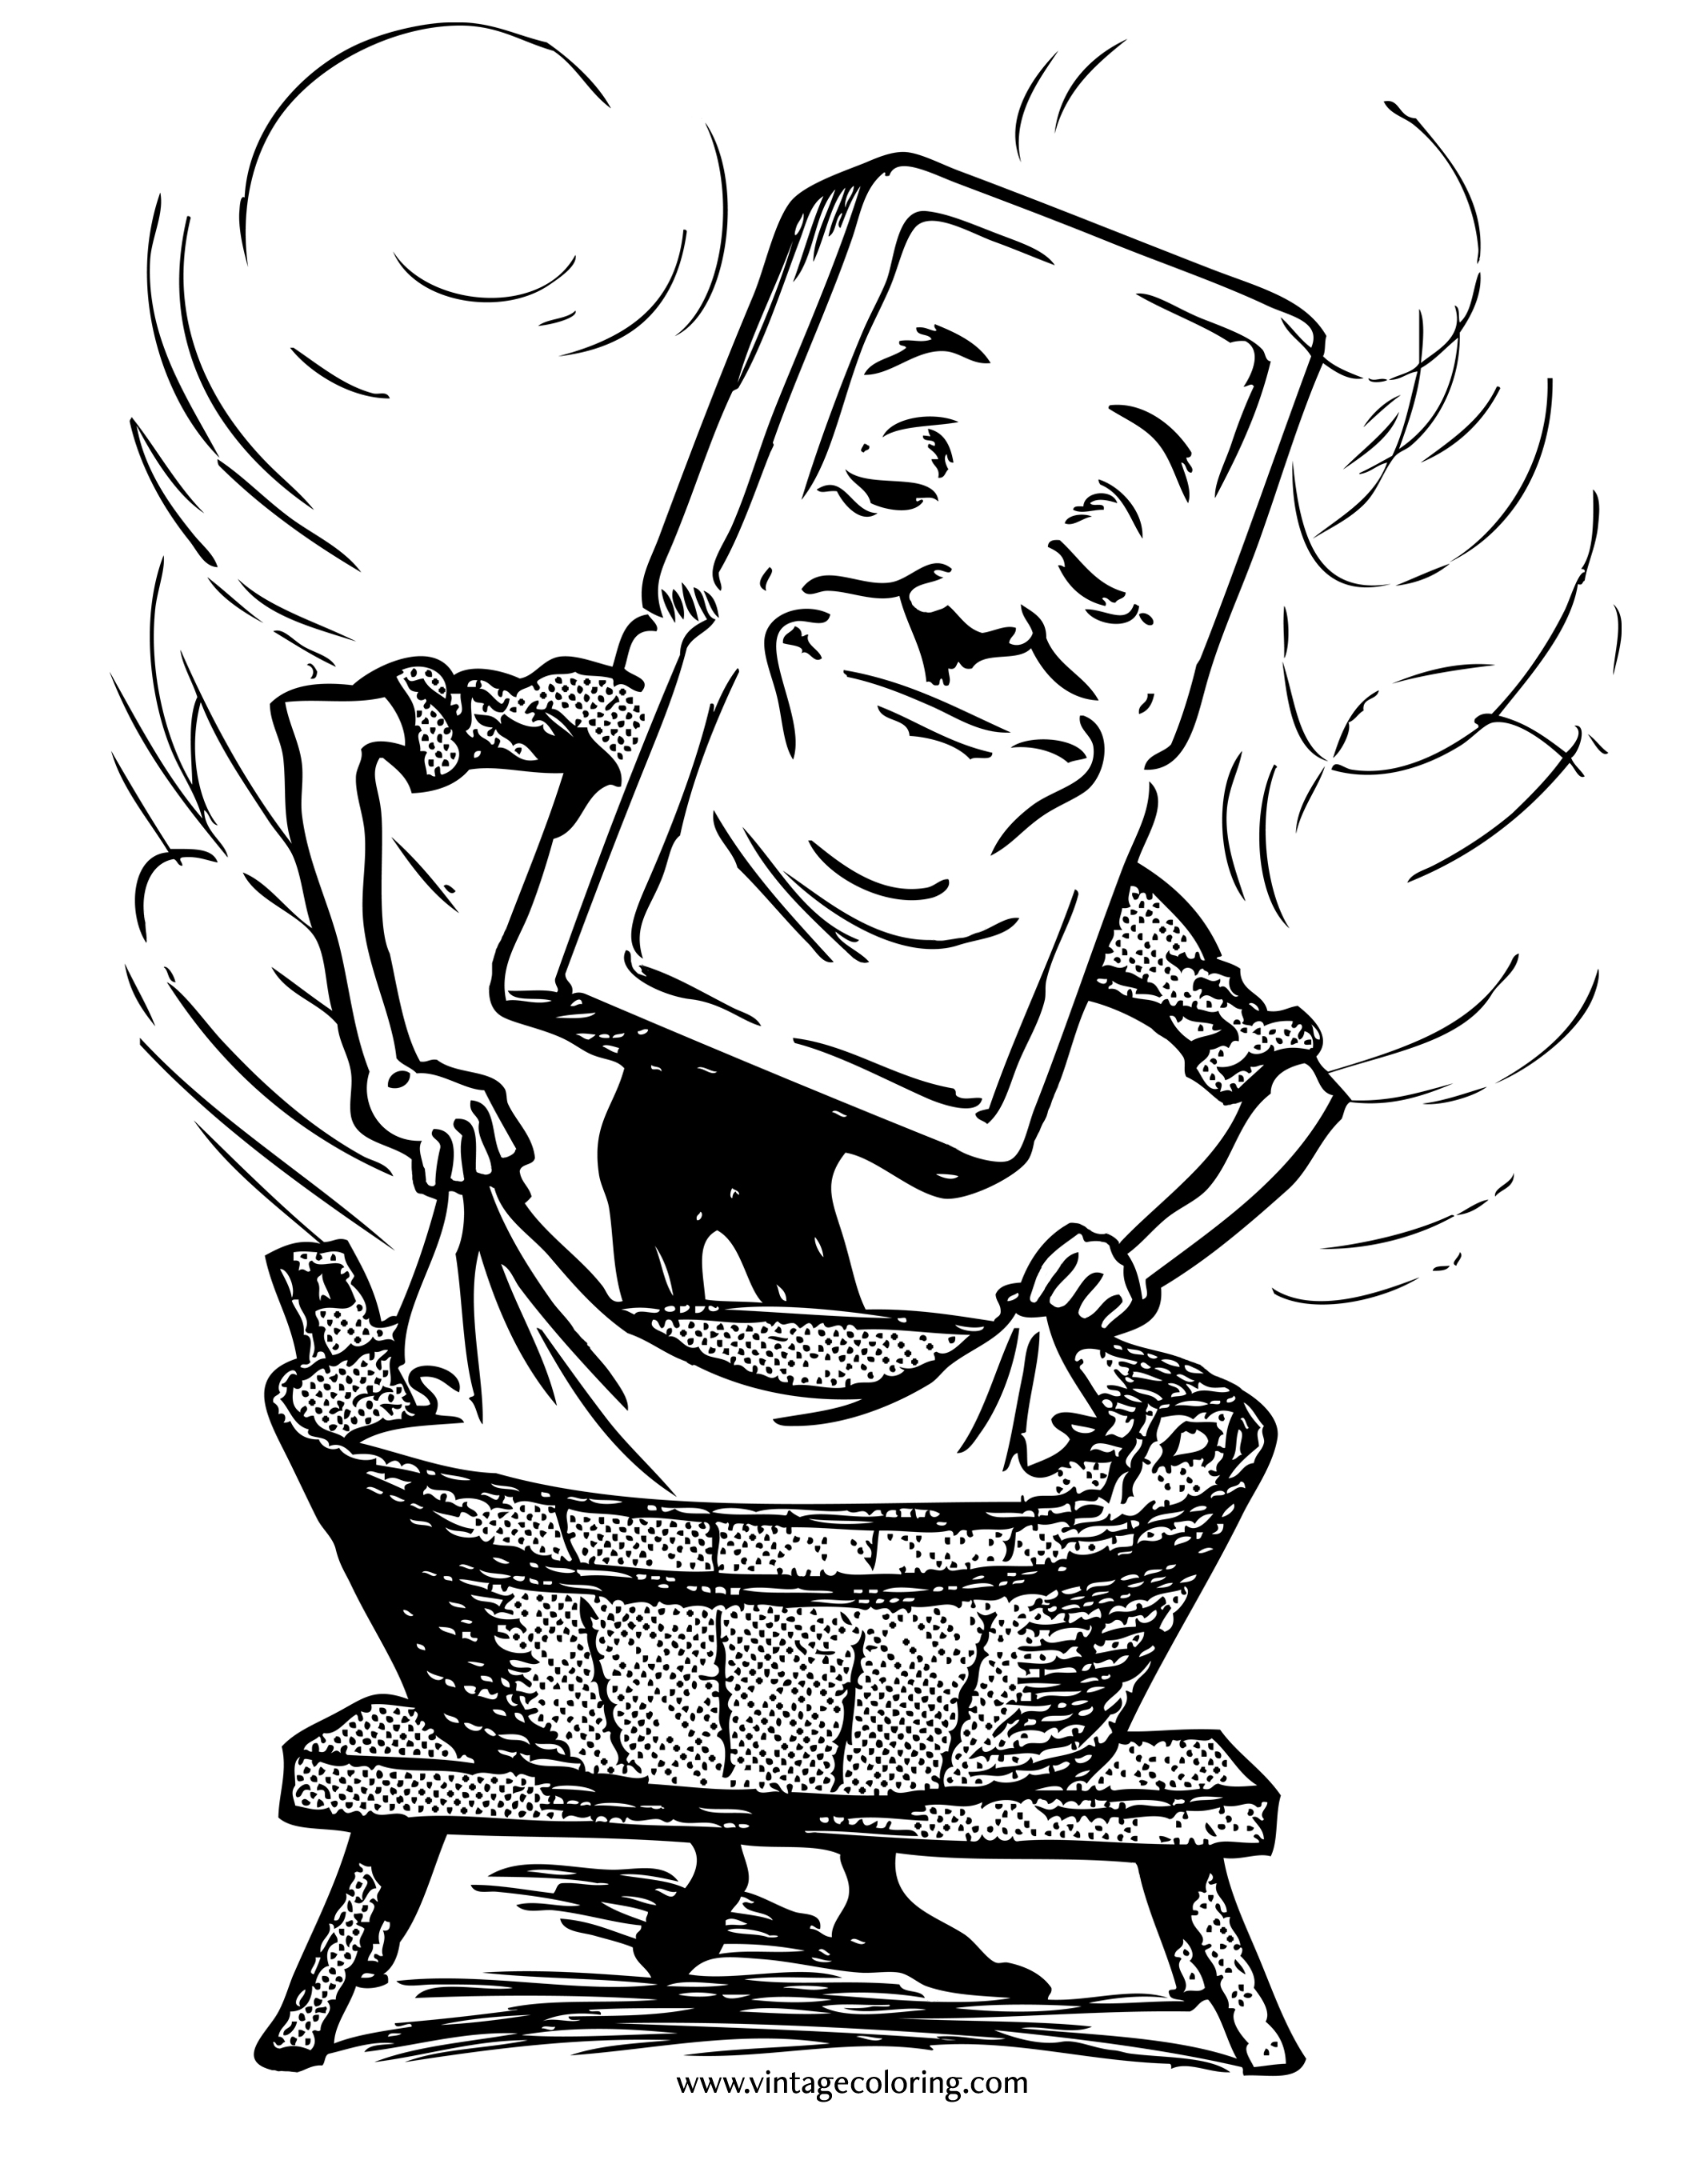 Soap Man Cartoon - A Free Vintage Coloring Page - Coloring Home